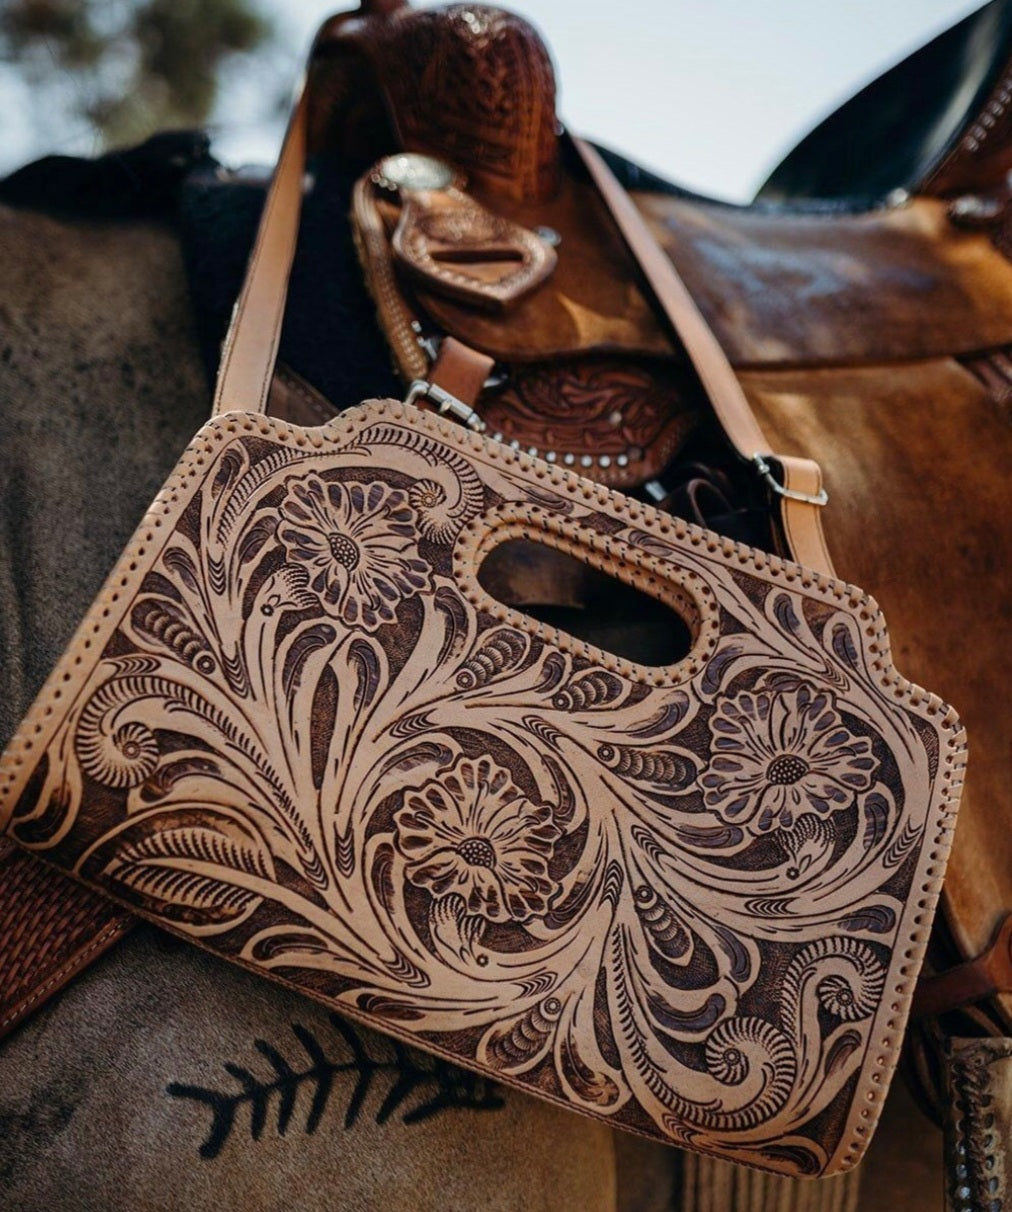 Floral Tooled